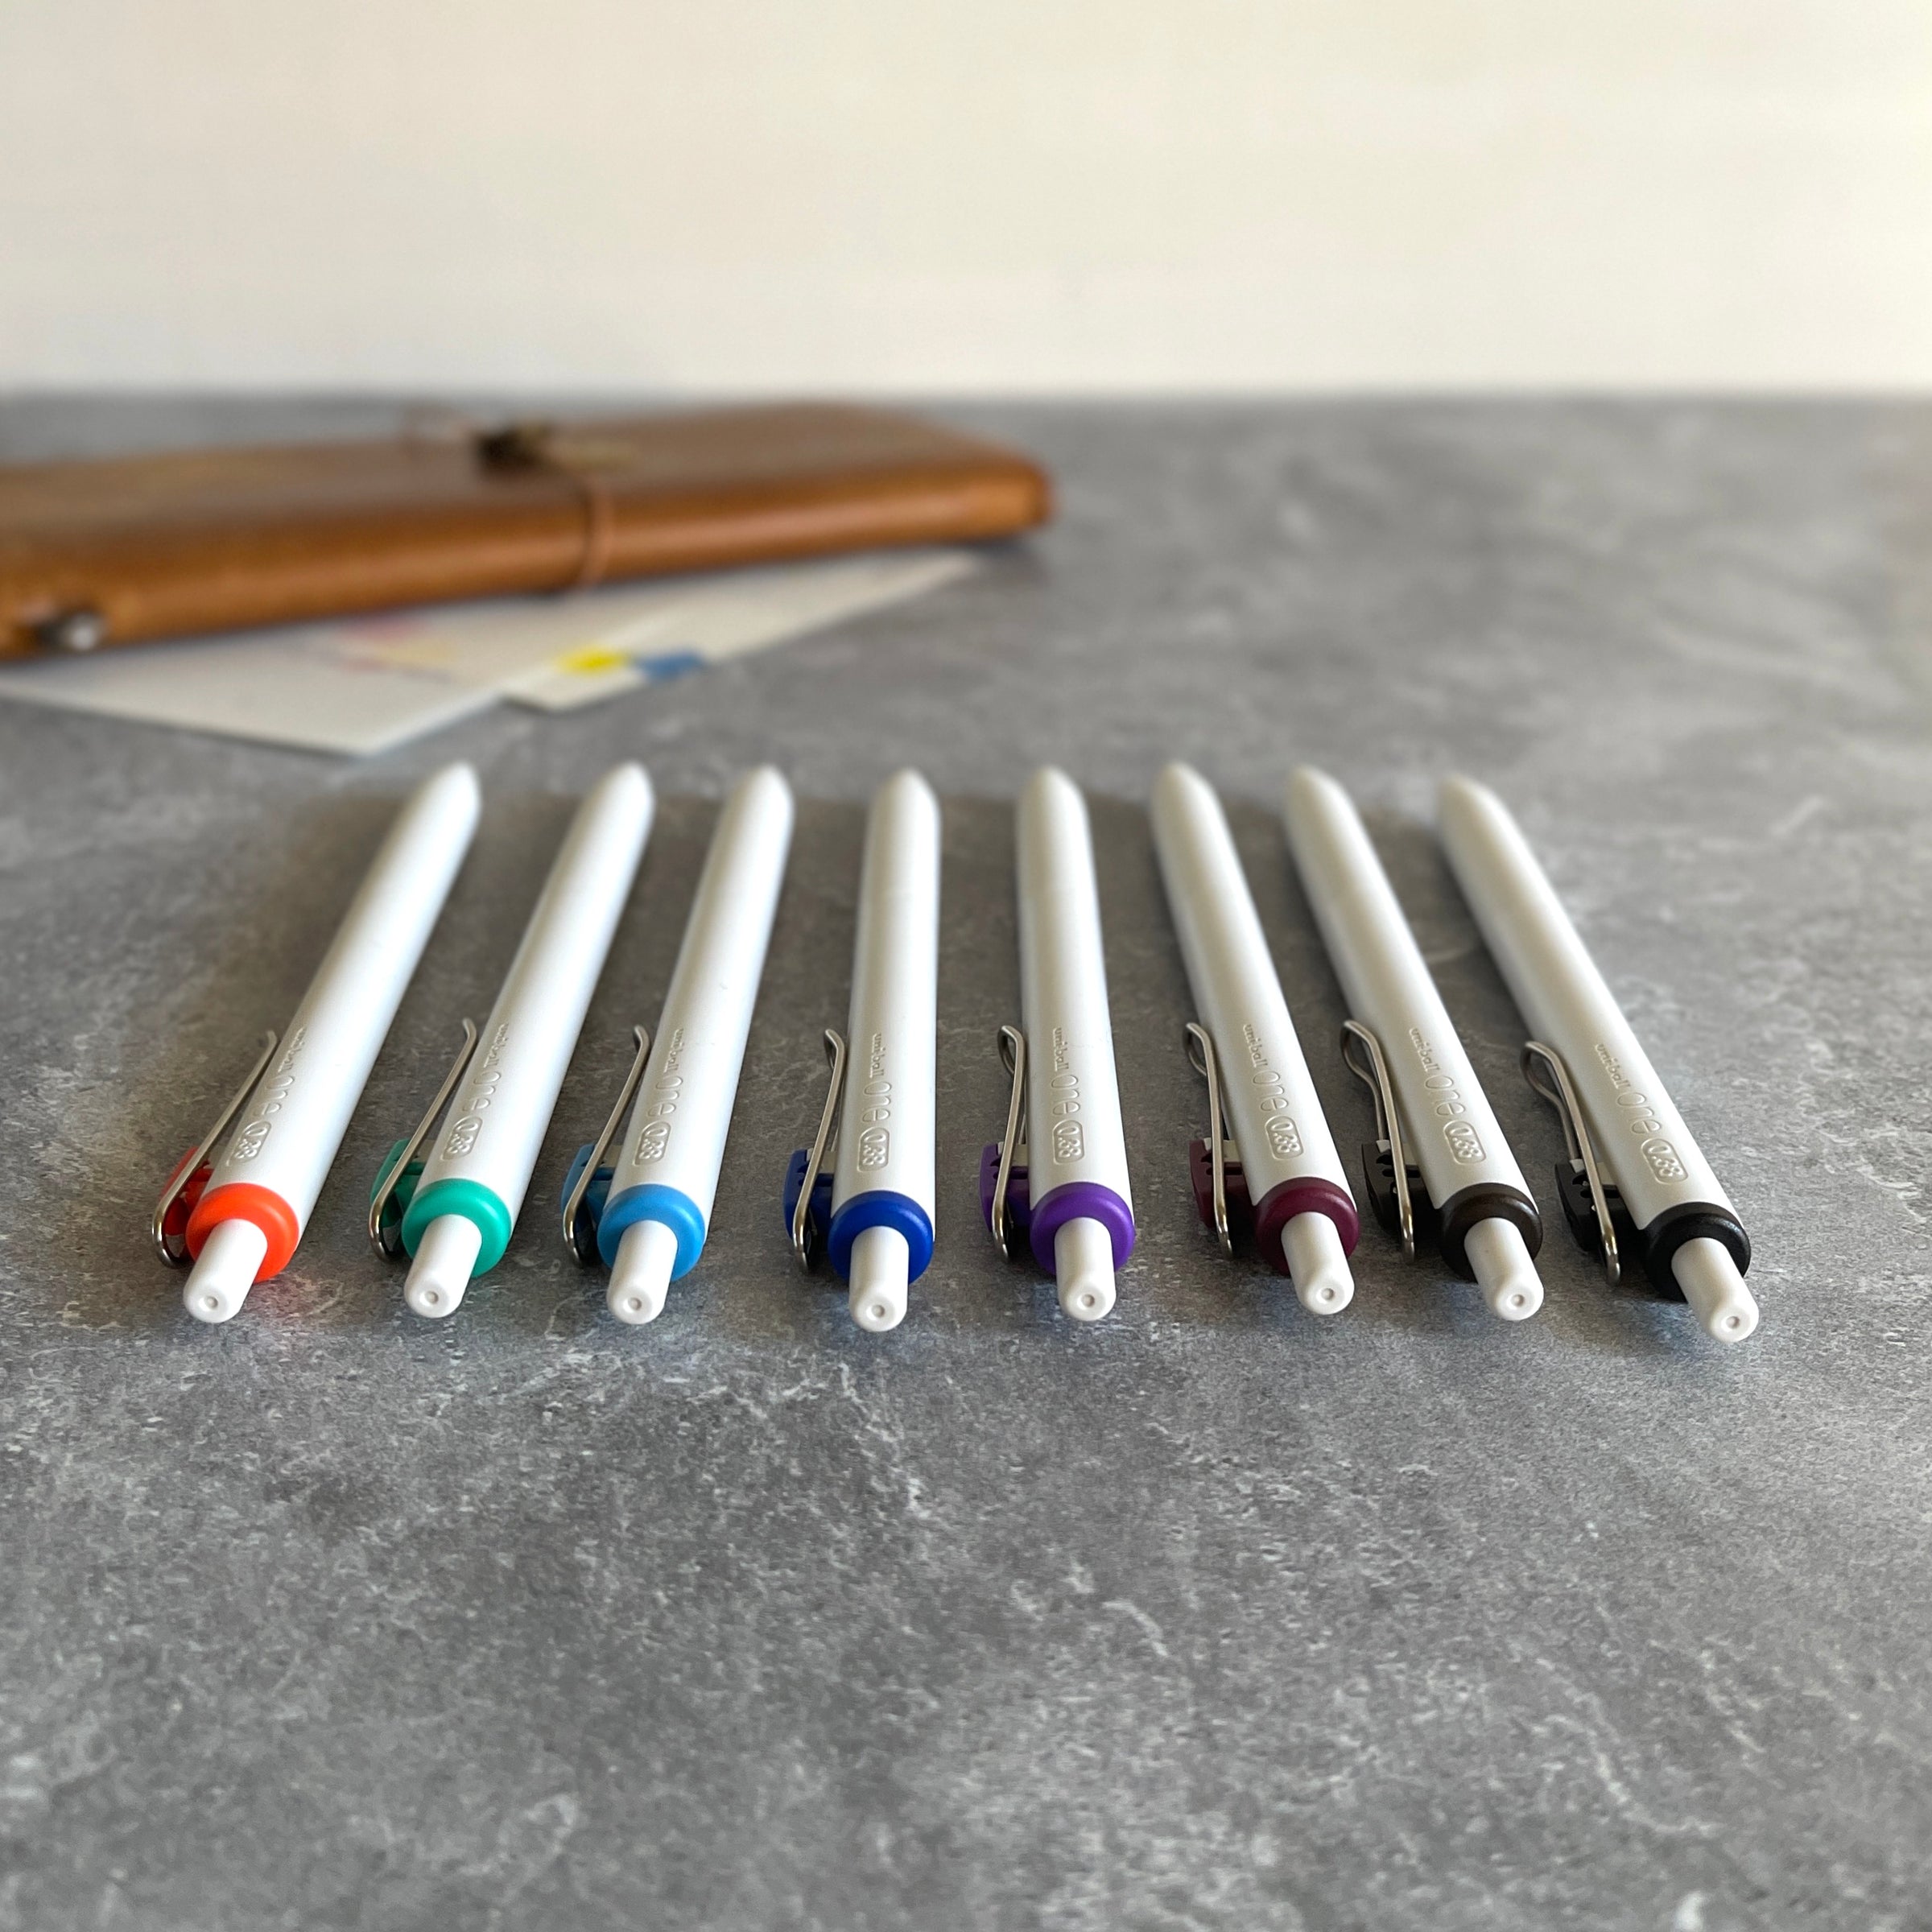 Uni-ball One Gel Pen (0.38 mm) – Sumthings of Mine